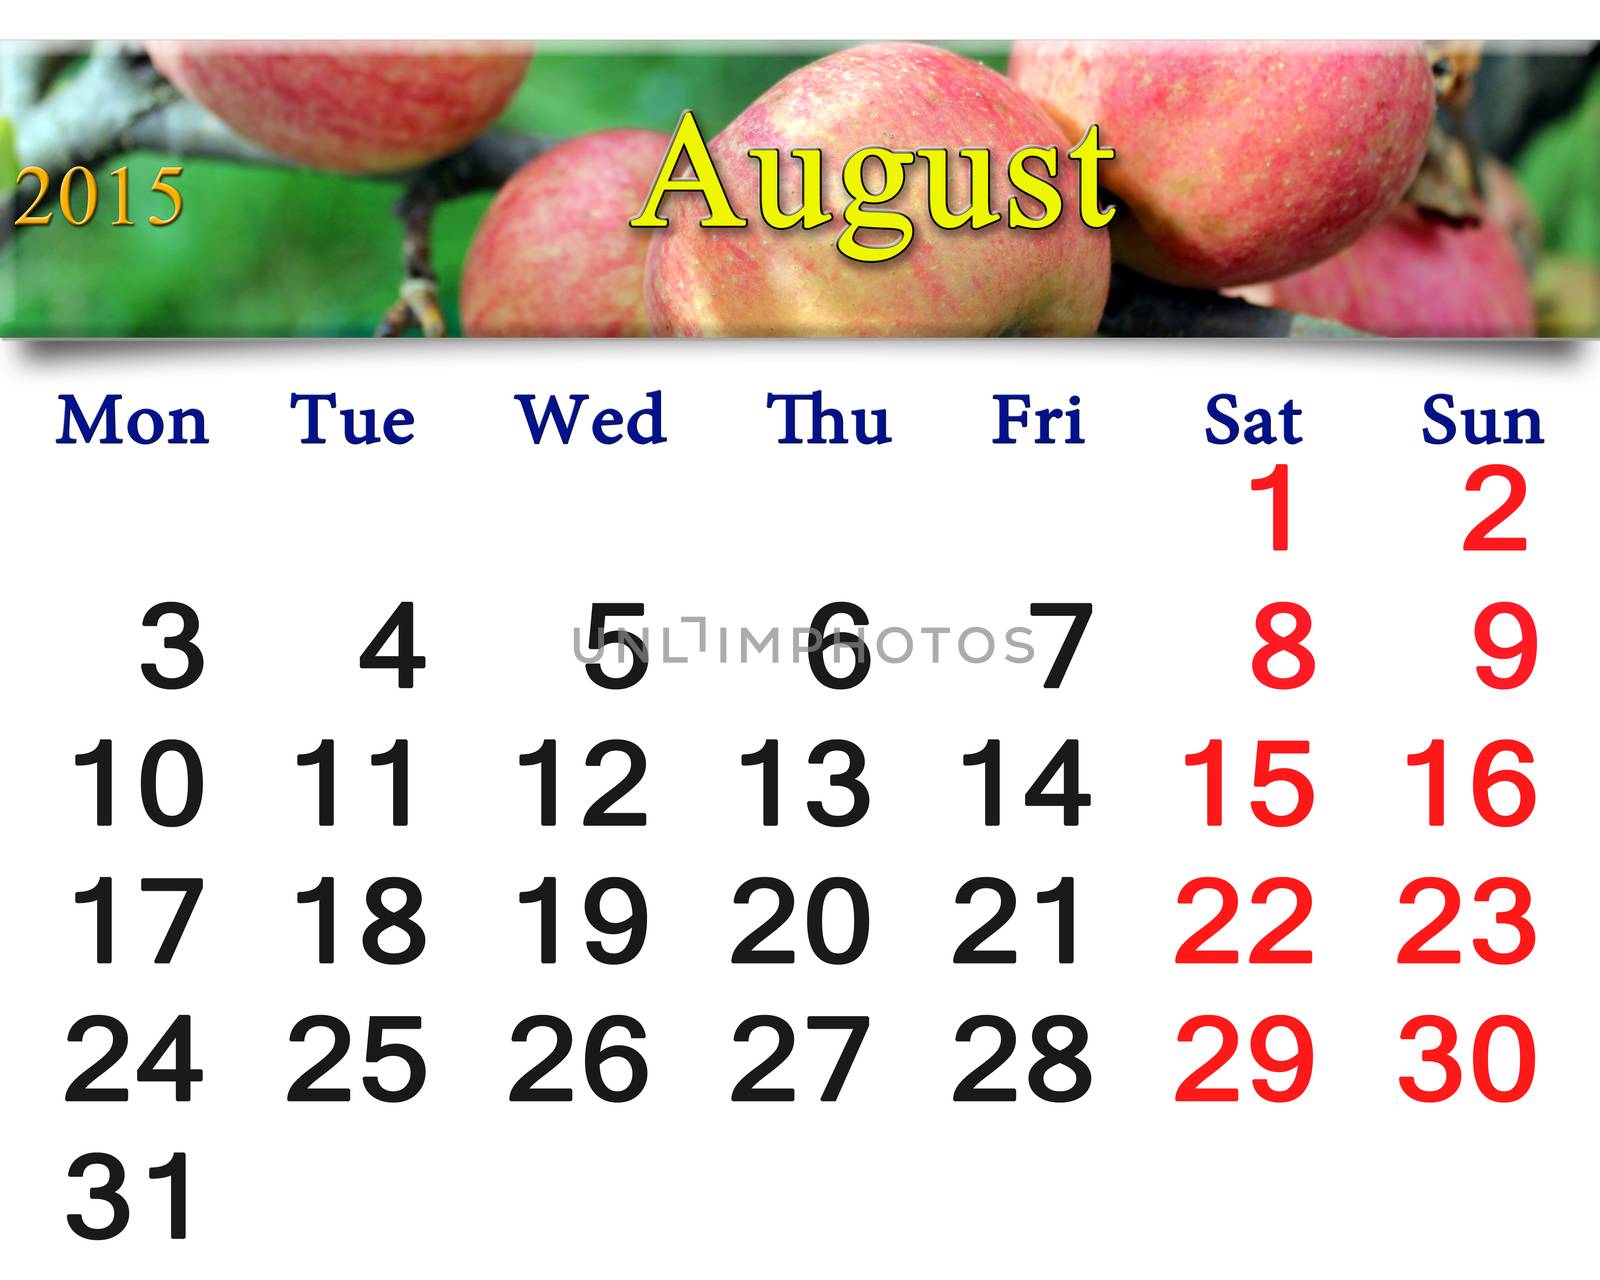 calendar for the August of 2015 year with apples by alexmak